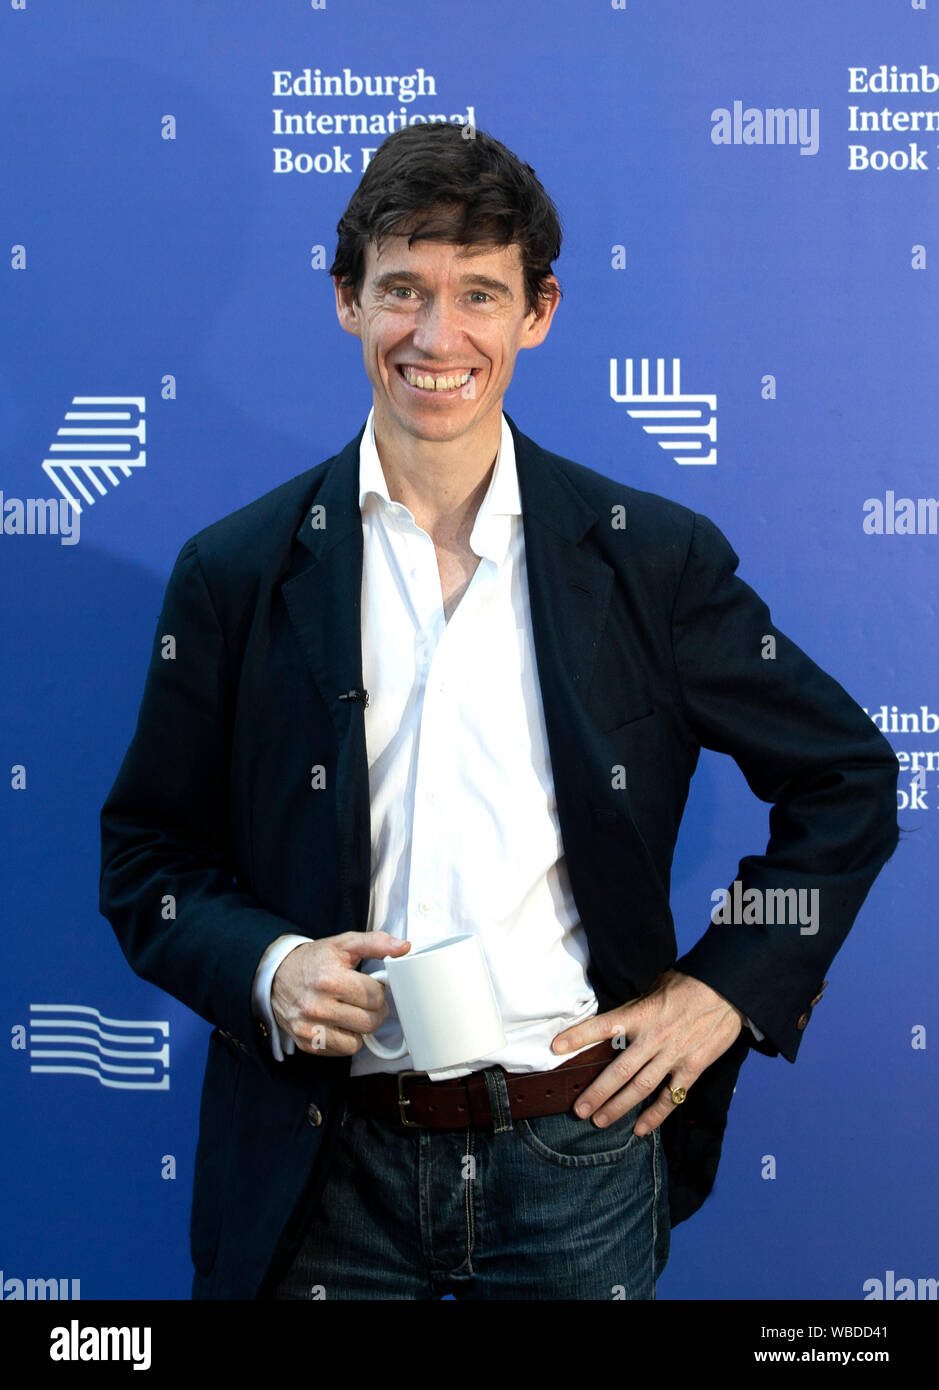 Conservative MP Rory Stewart before his discussion event 'Lessons from Literature for Today's Politics' at the 2019 Edinburgh International Book Festival, Edinburgh. Stock Photo